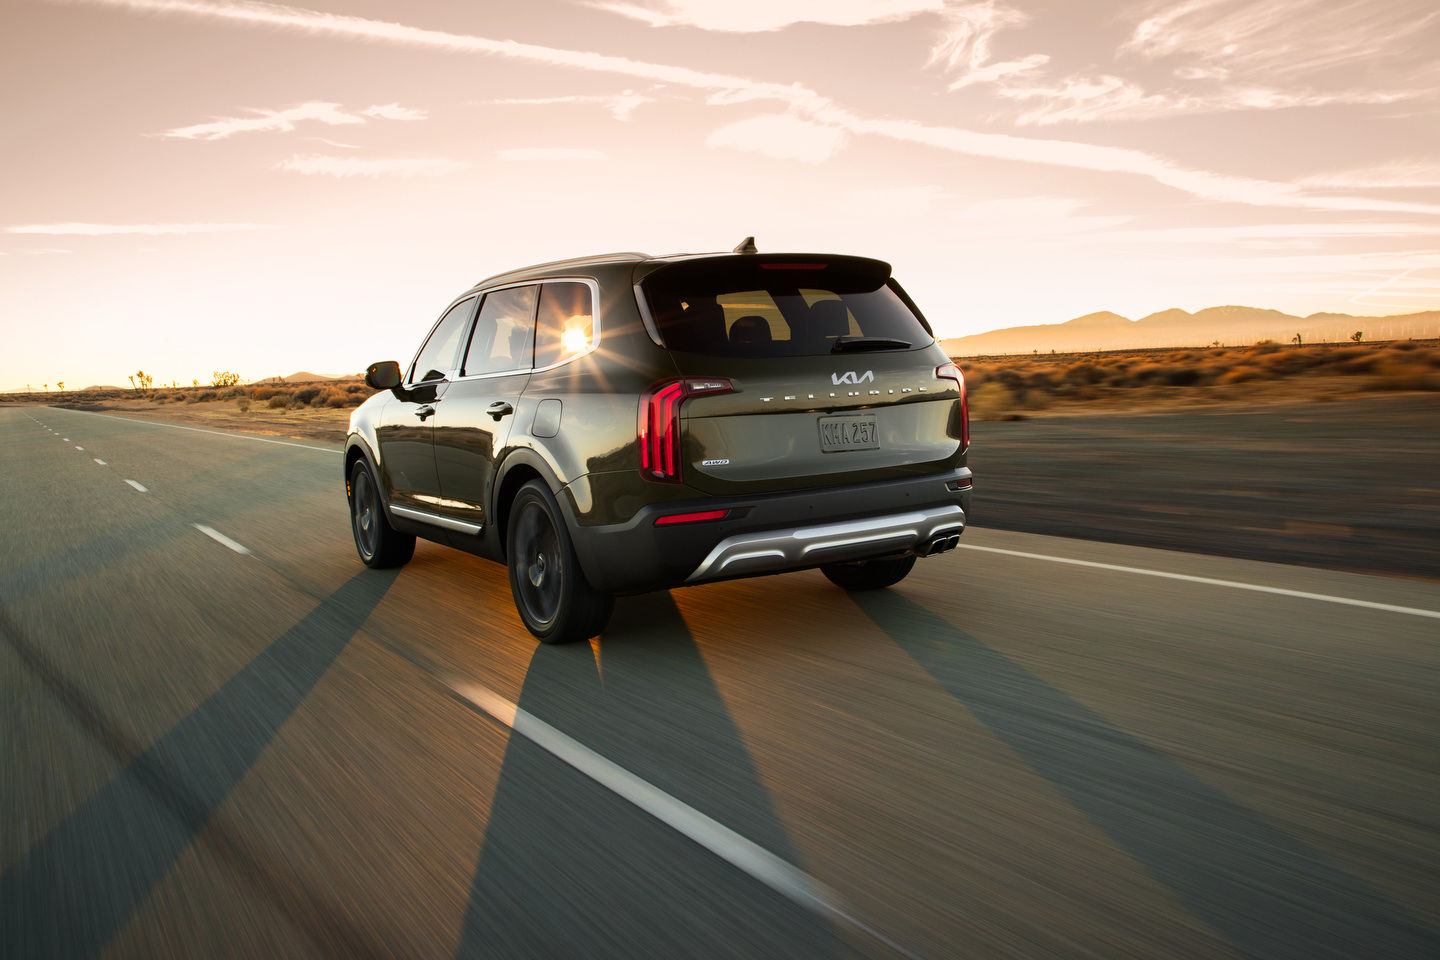 2022 Kia Telluride: Could it be the perfect new SUV for your family?